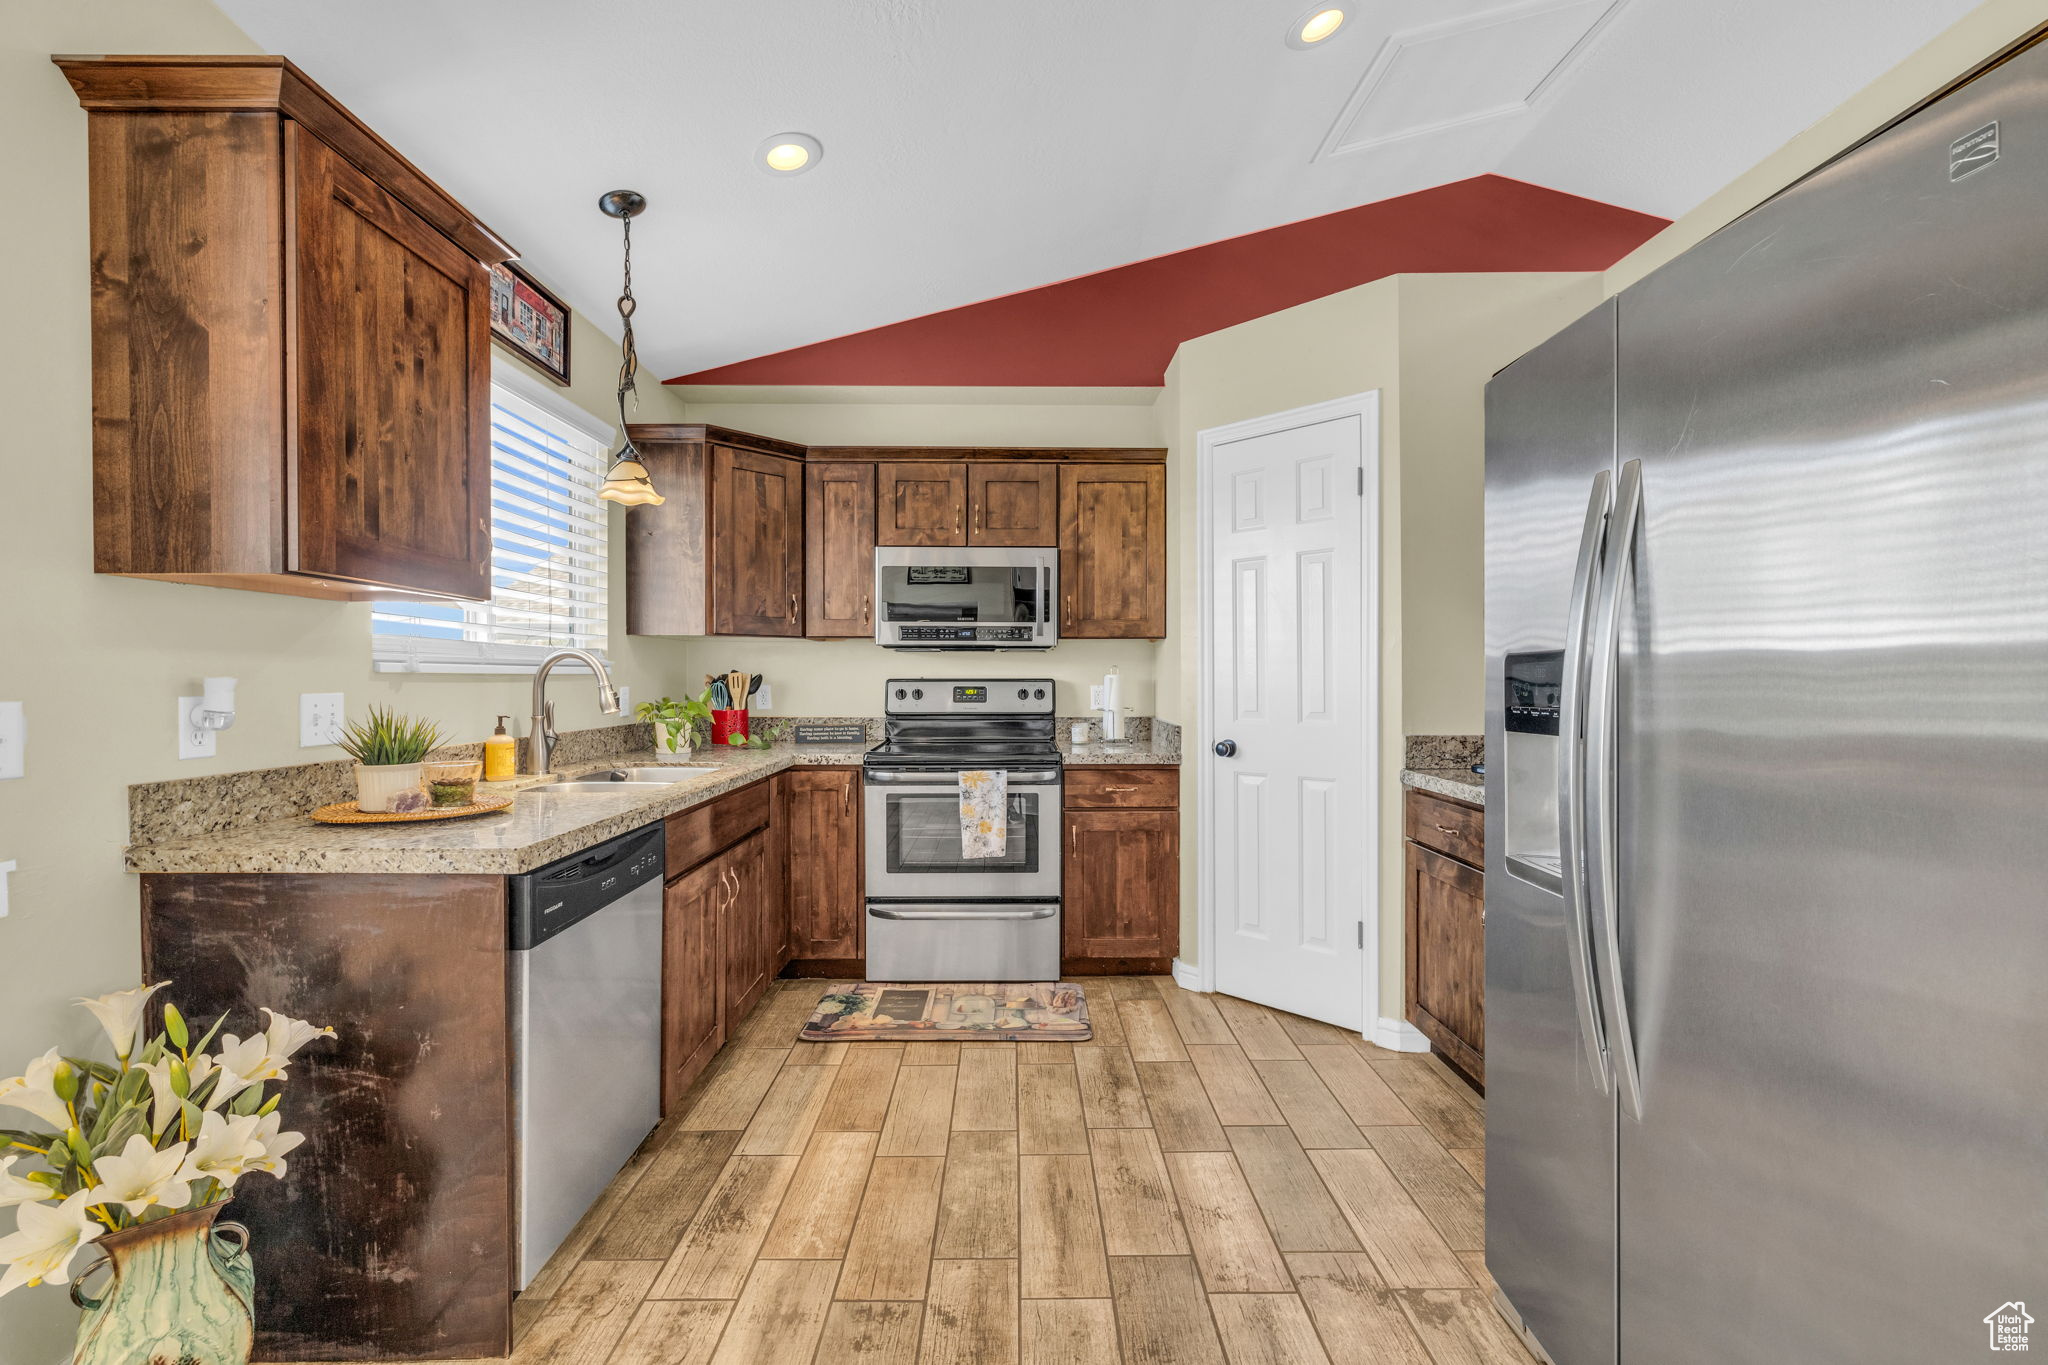 Kitchen with decorative light fixtures, appliances with stainless steel finishes, light hardwood / wood-style flooring, lofted ceiling, and sink